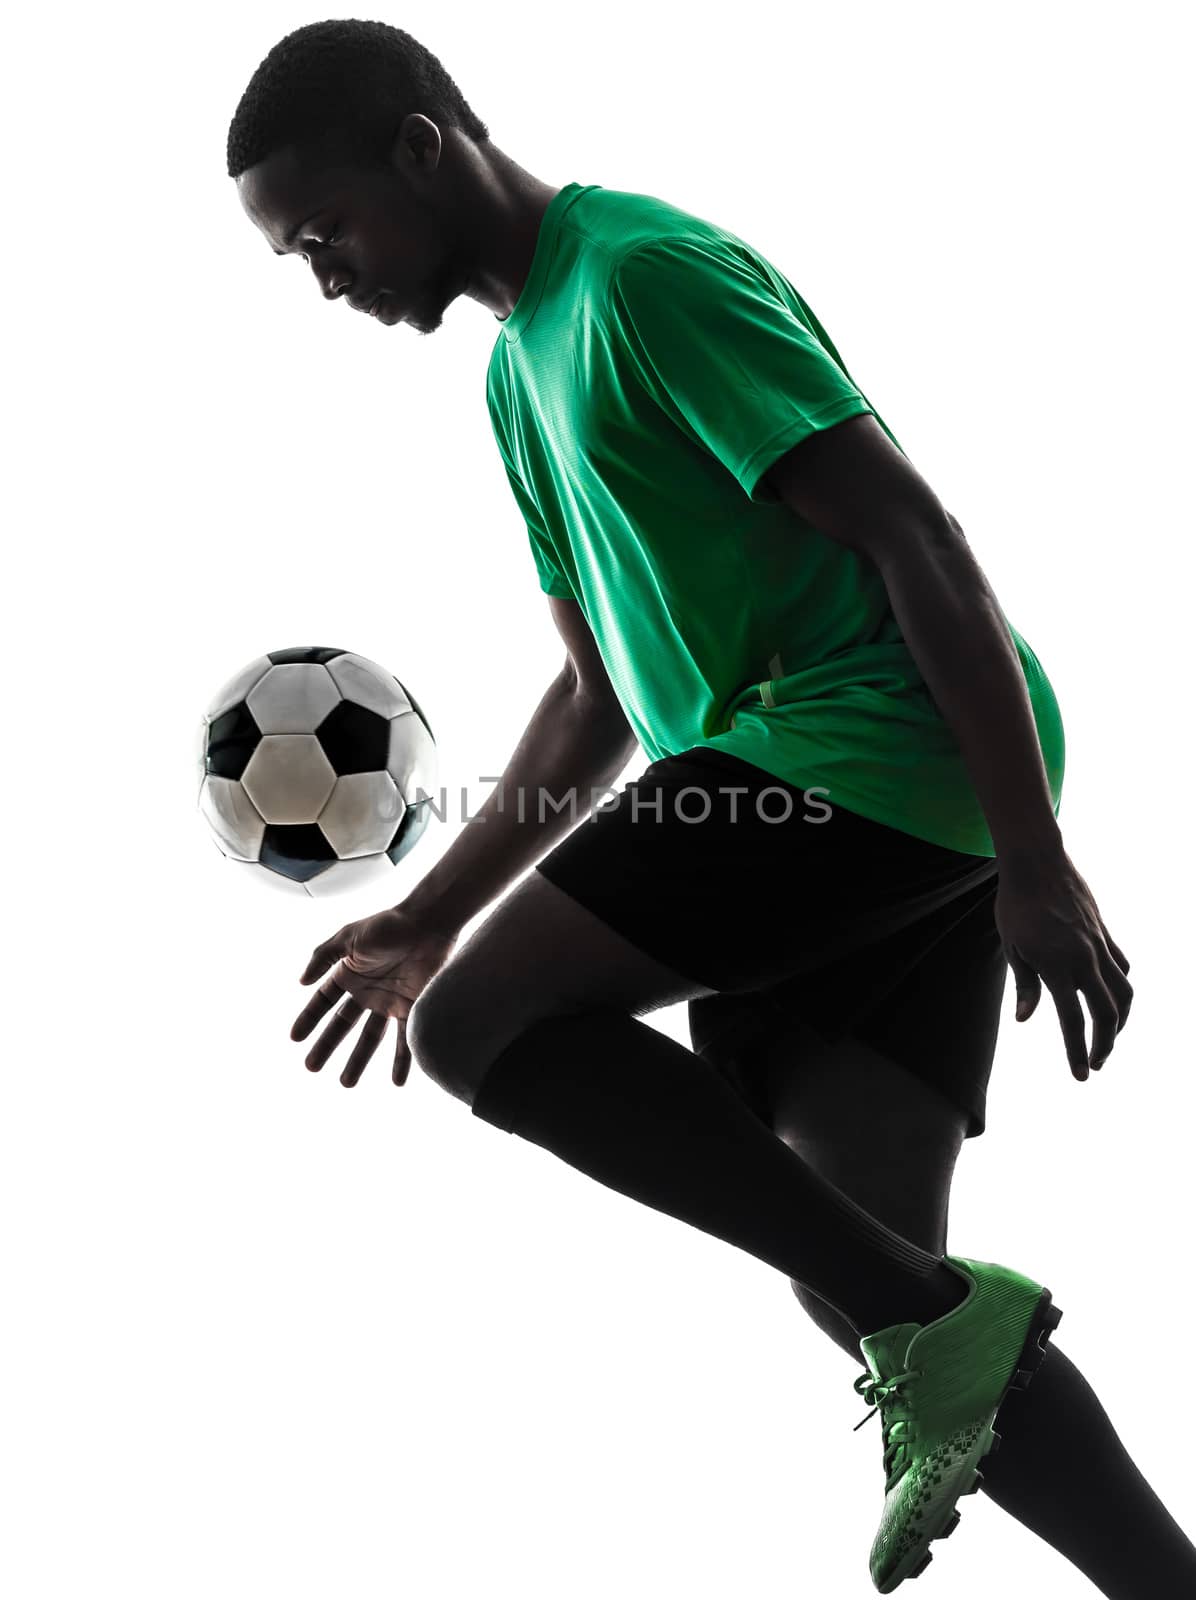 one african man soccer player green jersey juggling in silhouette  on white background